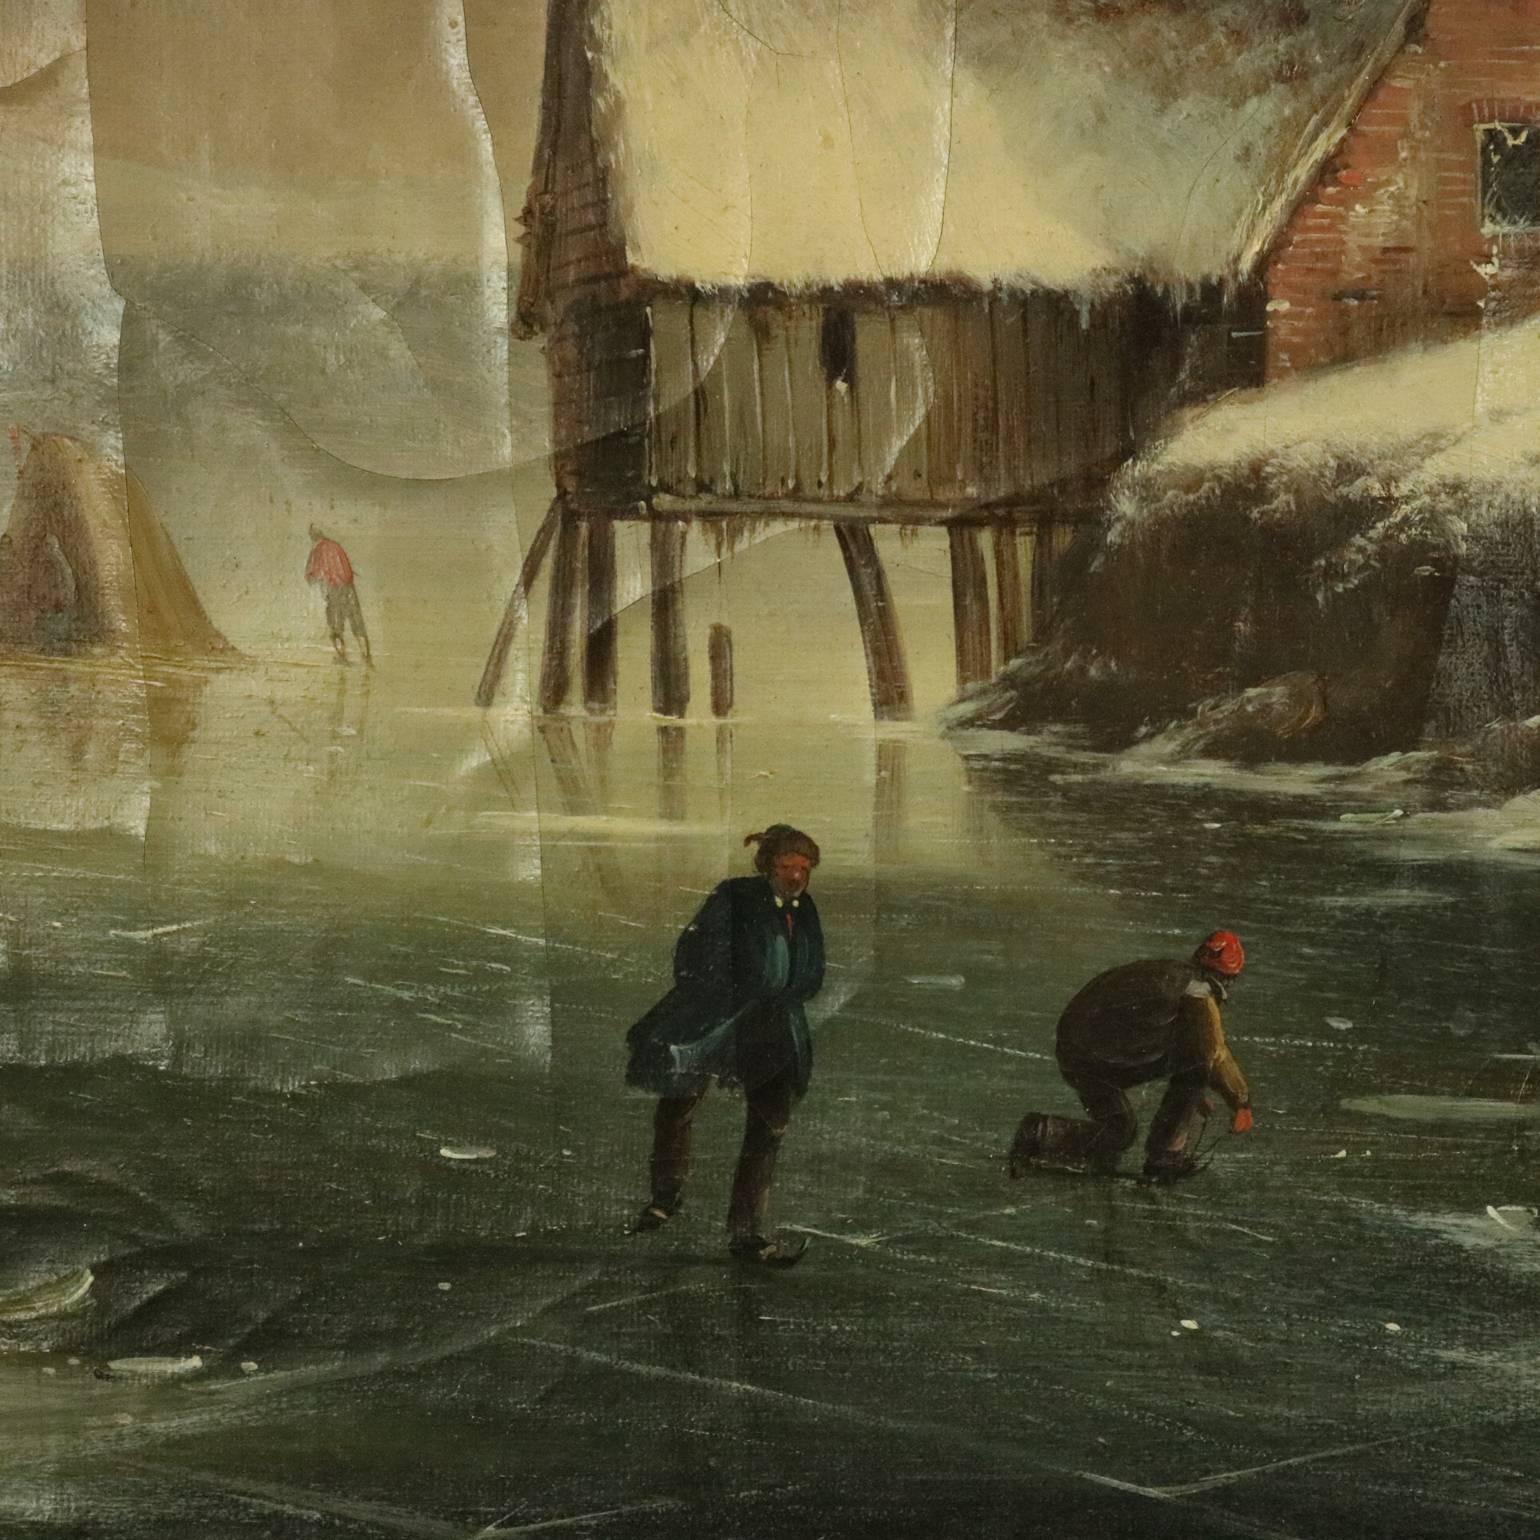 Antique oil on canvas painting by listed artist Van Zeebroeck depicts Dutch scene with ice skaters and fishing on a frozen lake or pond, signed and dated lower right, giltwood frame, 1849

Measures - 32" H x 40" W x 4" D framed;